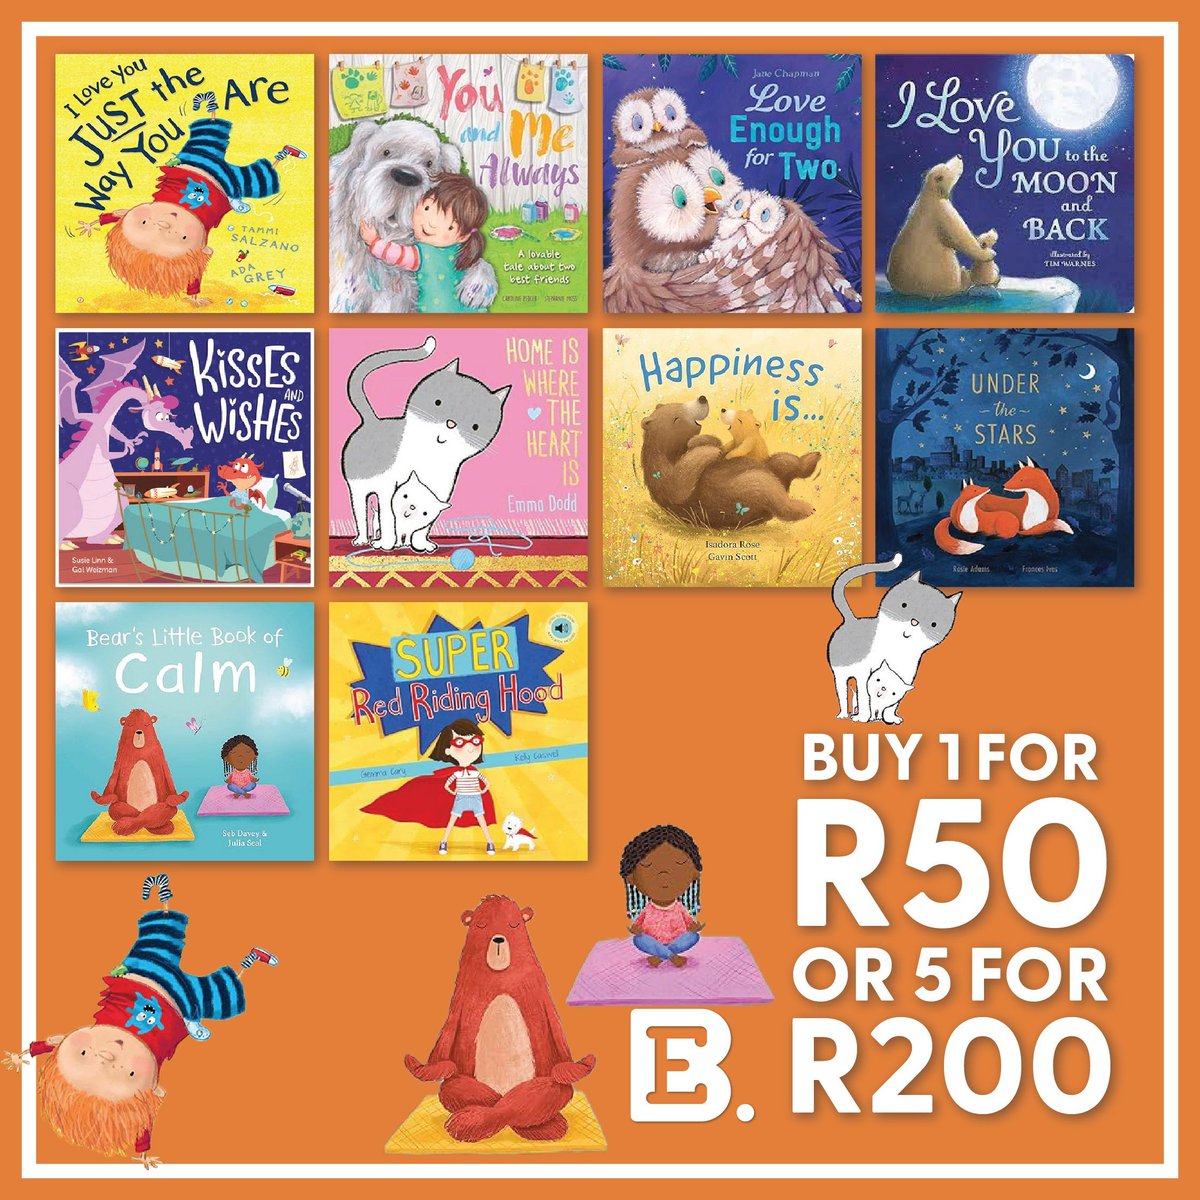 Grab amazing offers from @exclusivebooks! Buy 1 book at R50 or 5 for R200. Offer lasts from 1st-31st May, only in-store. Hurry, stocks are limited! #ExclusiveBooks #EBFanatics #Melrosearch #ThePowerofReading #ChildrensBooks #TinybutMighty #SuperSweetReads